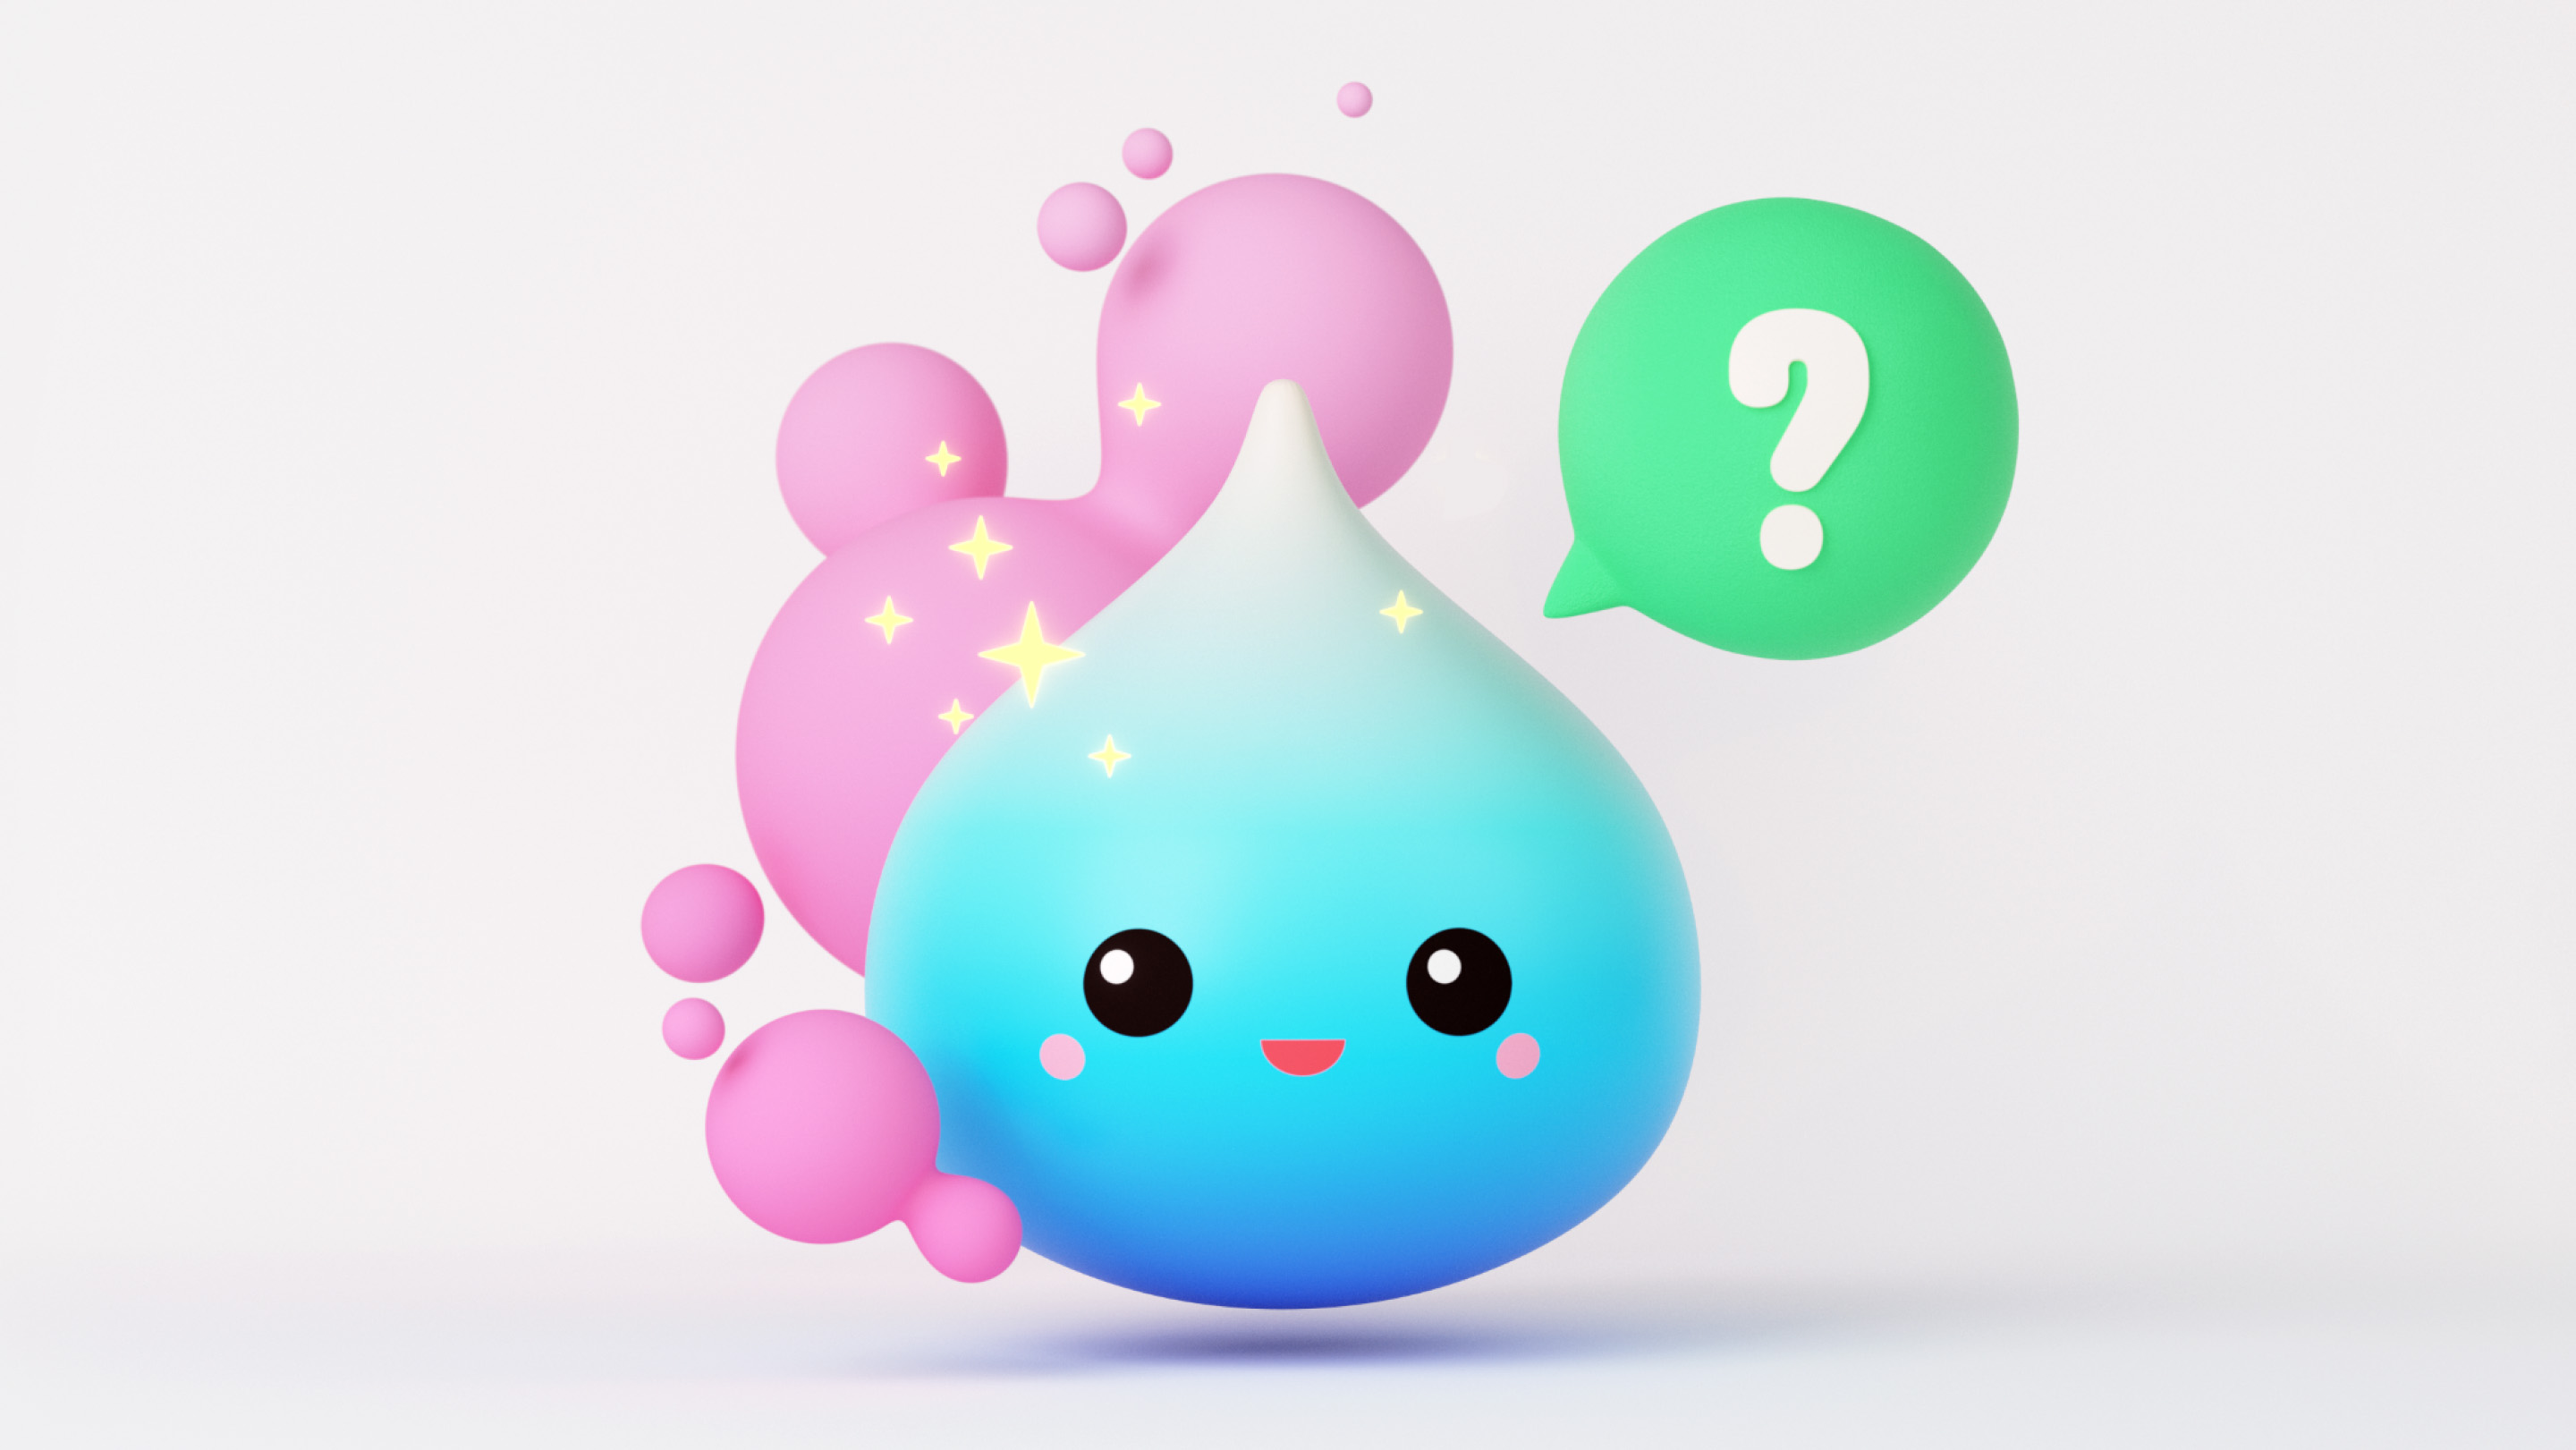 A little thing that looks like a water droplet with eyes. Next to it is a talk bubble with a question mark in it.